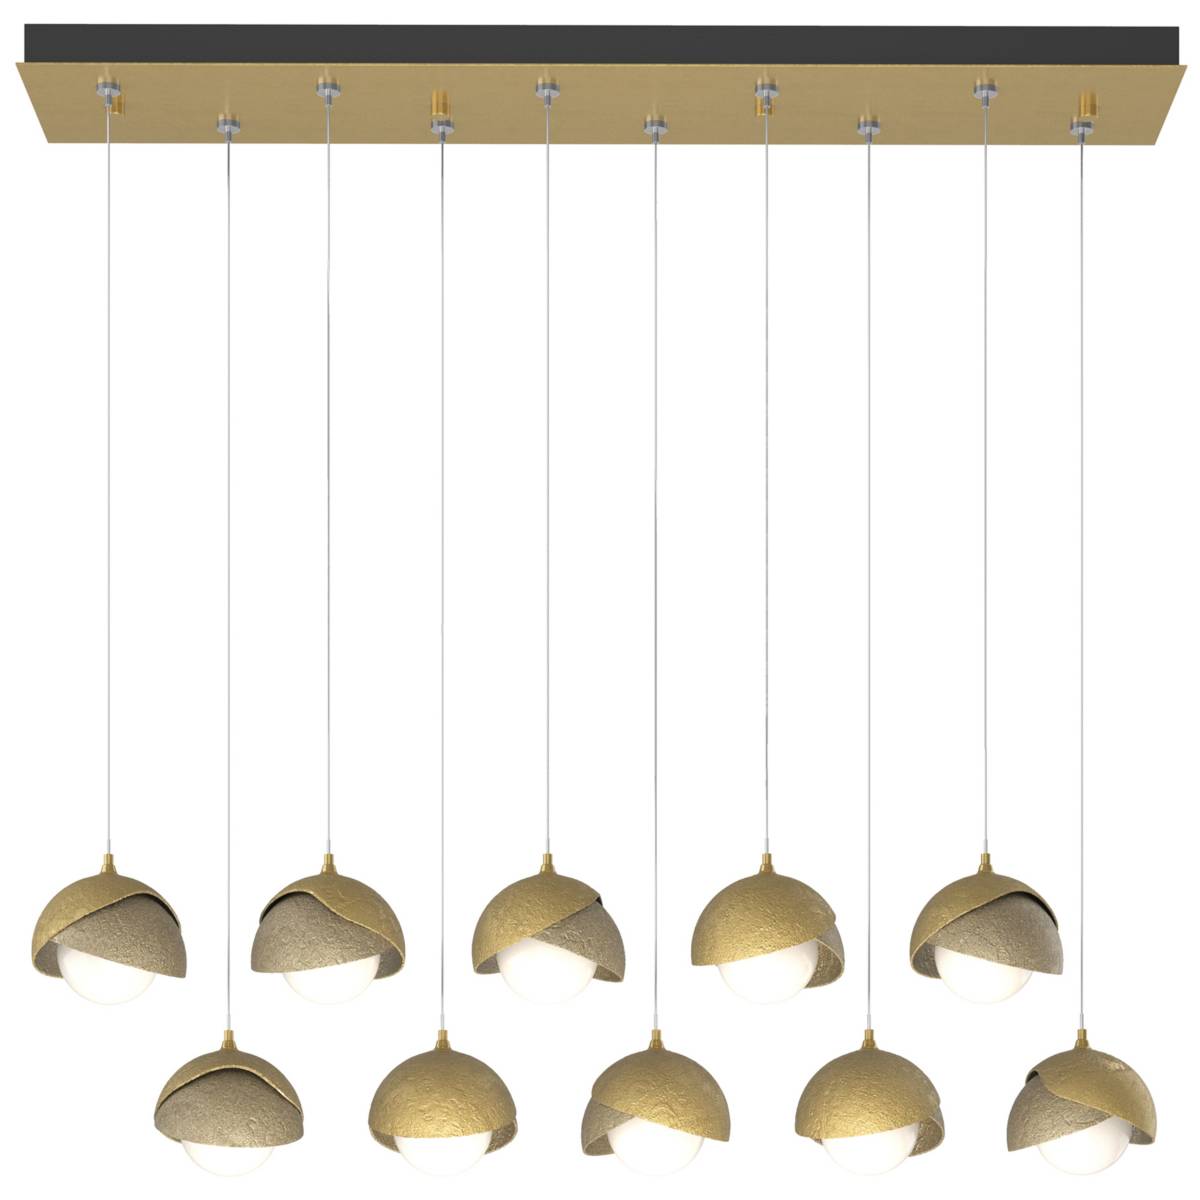 Chandeliers - Page 70 | Lamps Plus